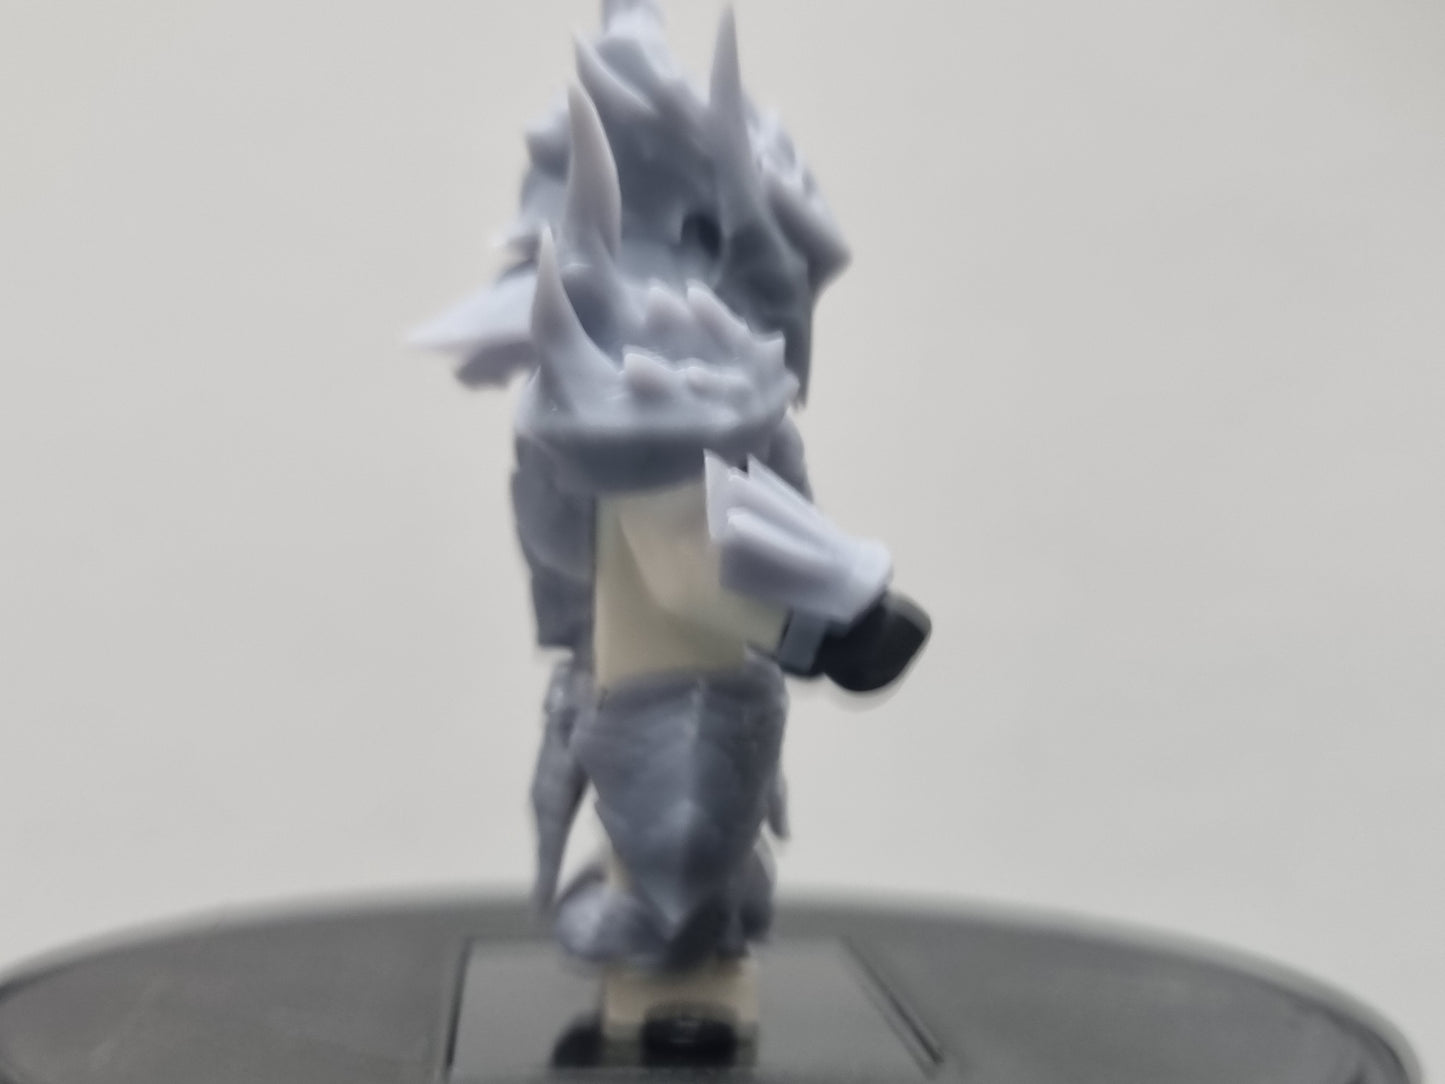 Custom lego compatible 3D printed hunter with shield and spear armor set!